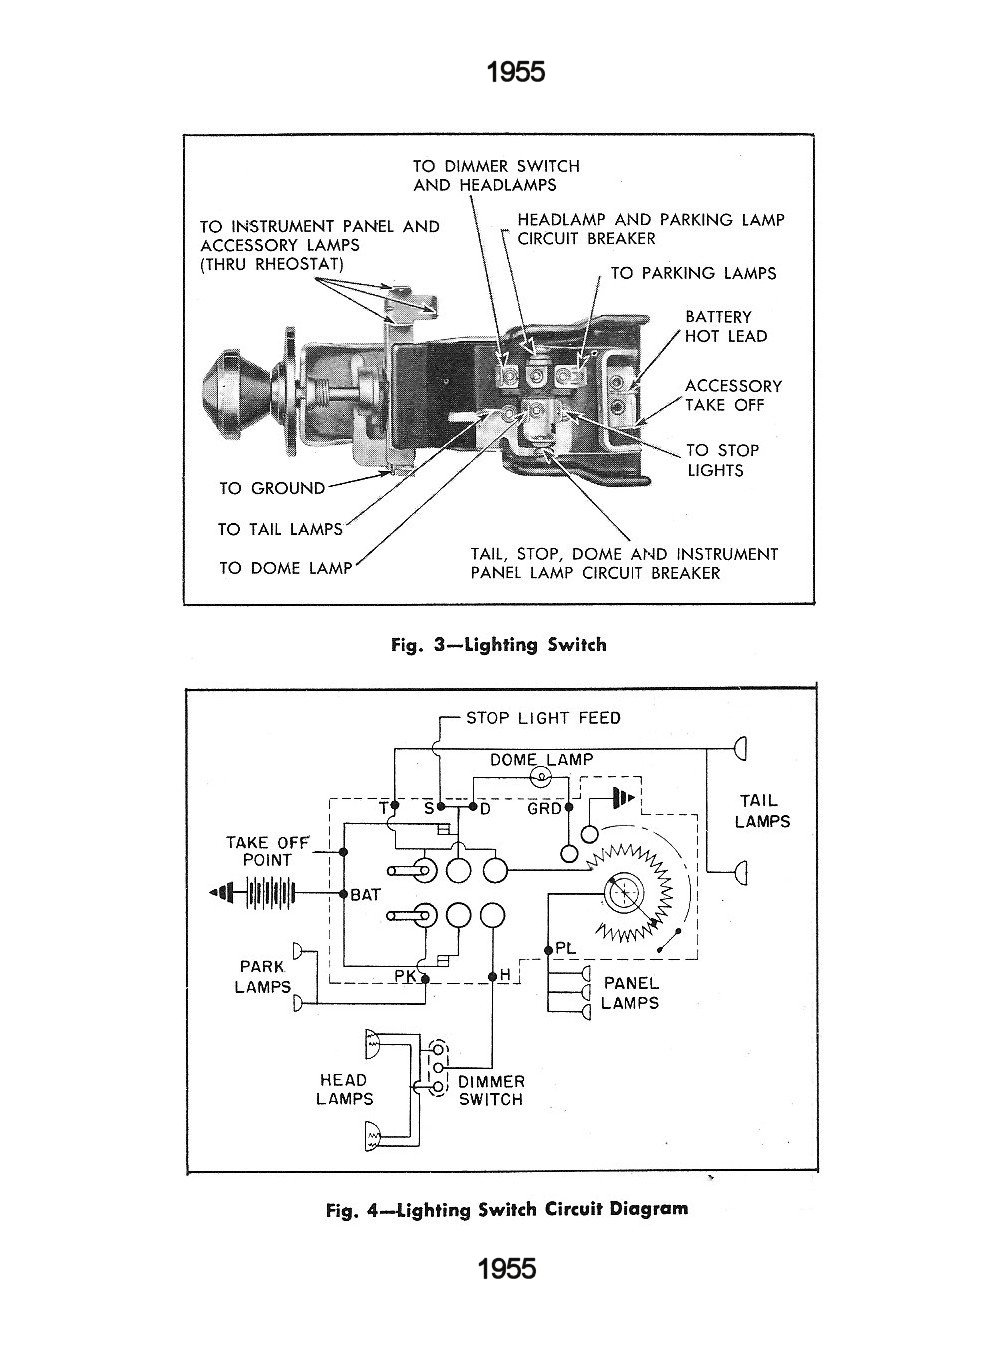 1986 Chevy Truck Ignition Switch Wiring Diagram from chevy.oldcarmanualproject.com